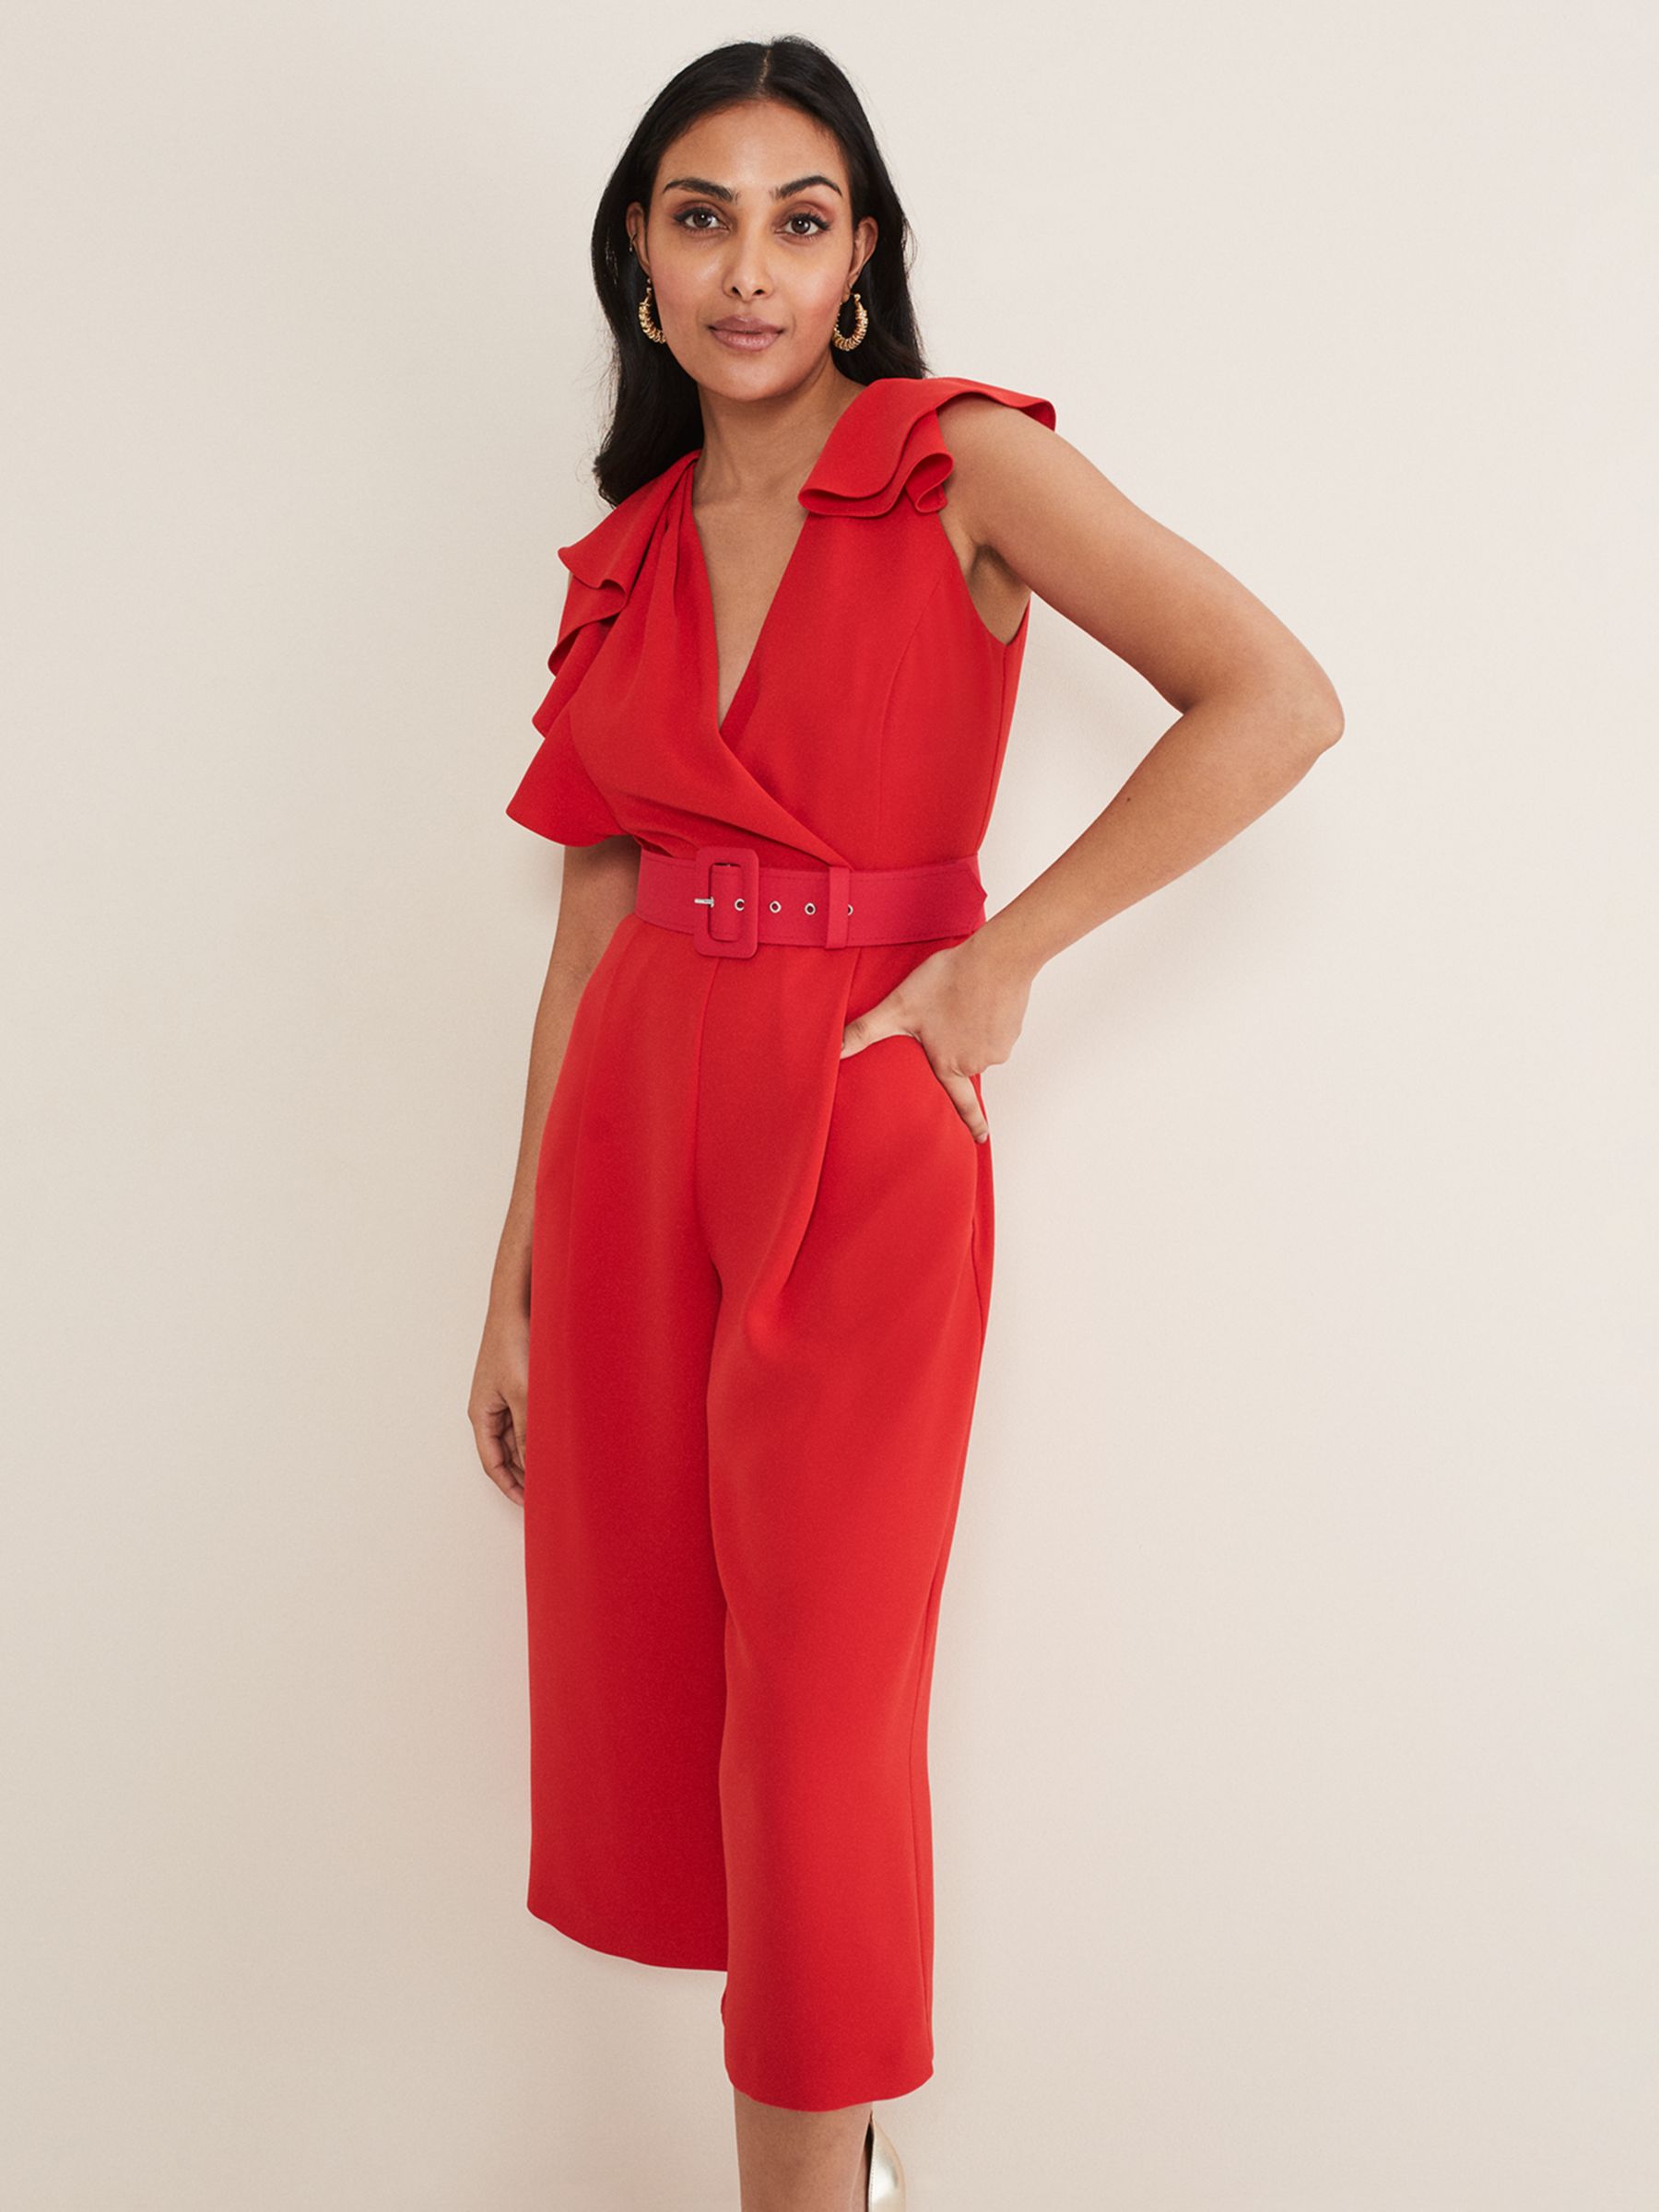 Phase Eight Petite Nicky Ruffle Jumpsuit, Red, 6